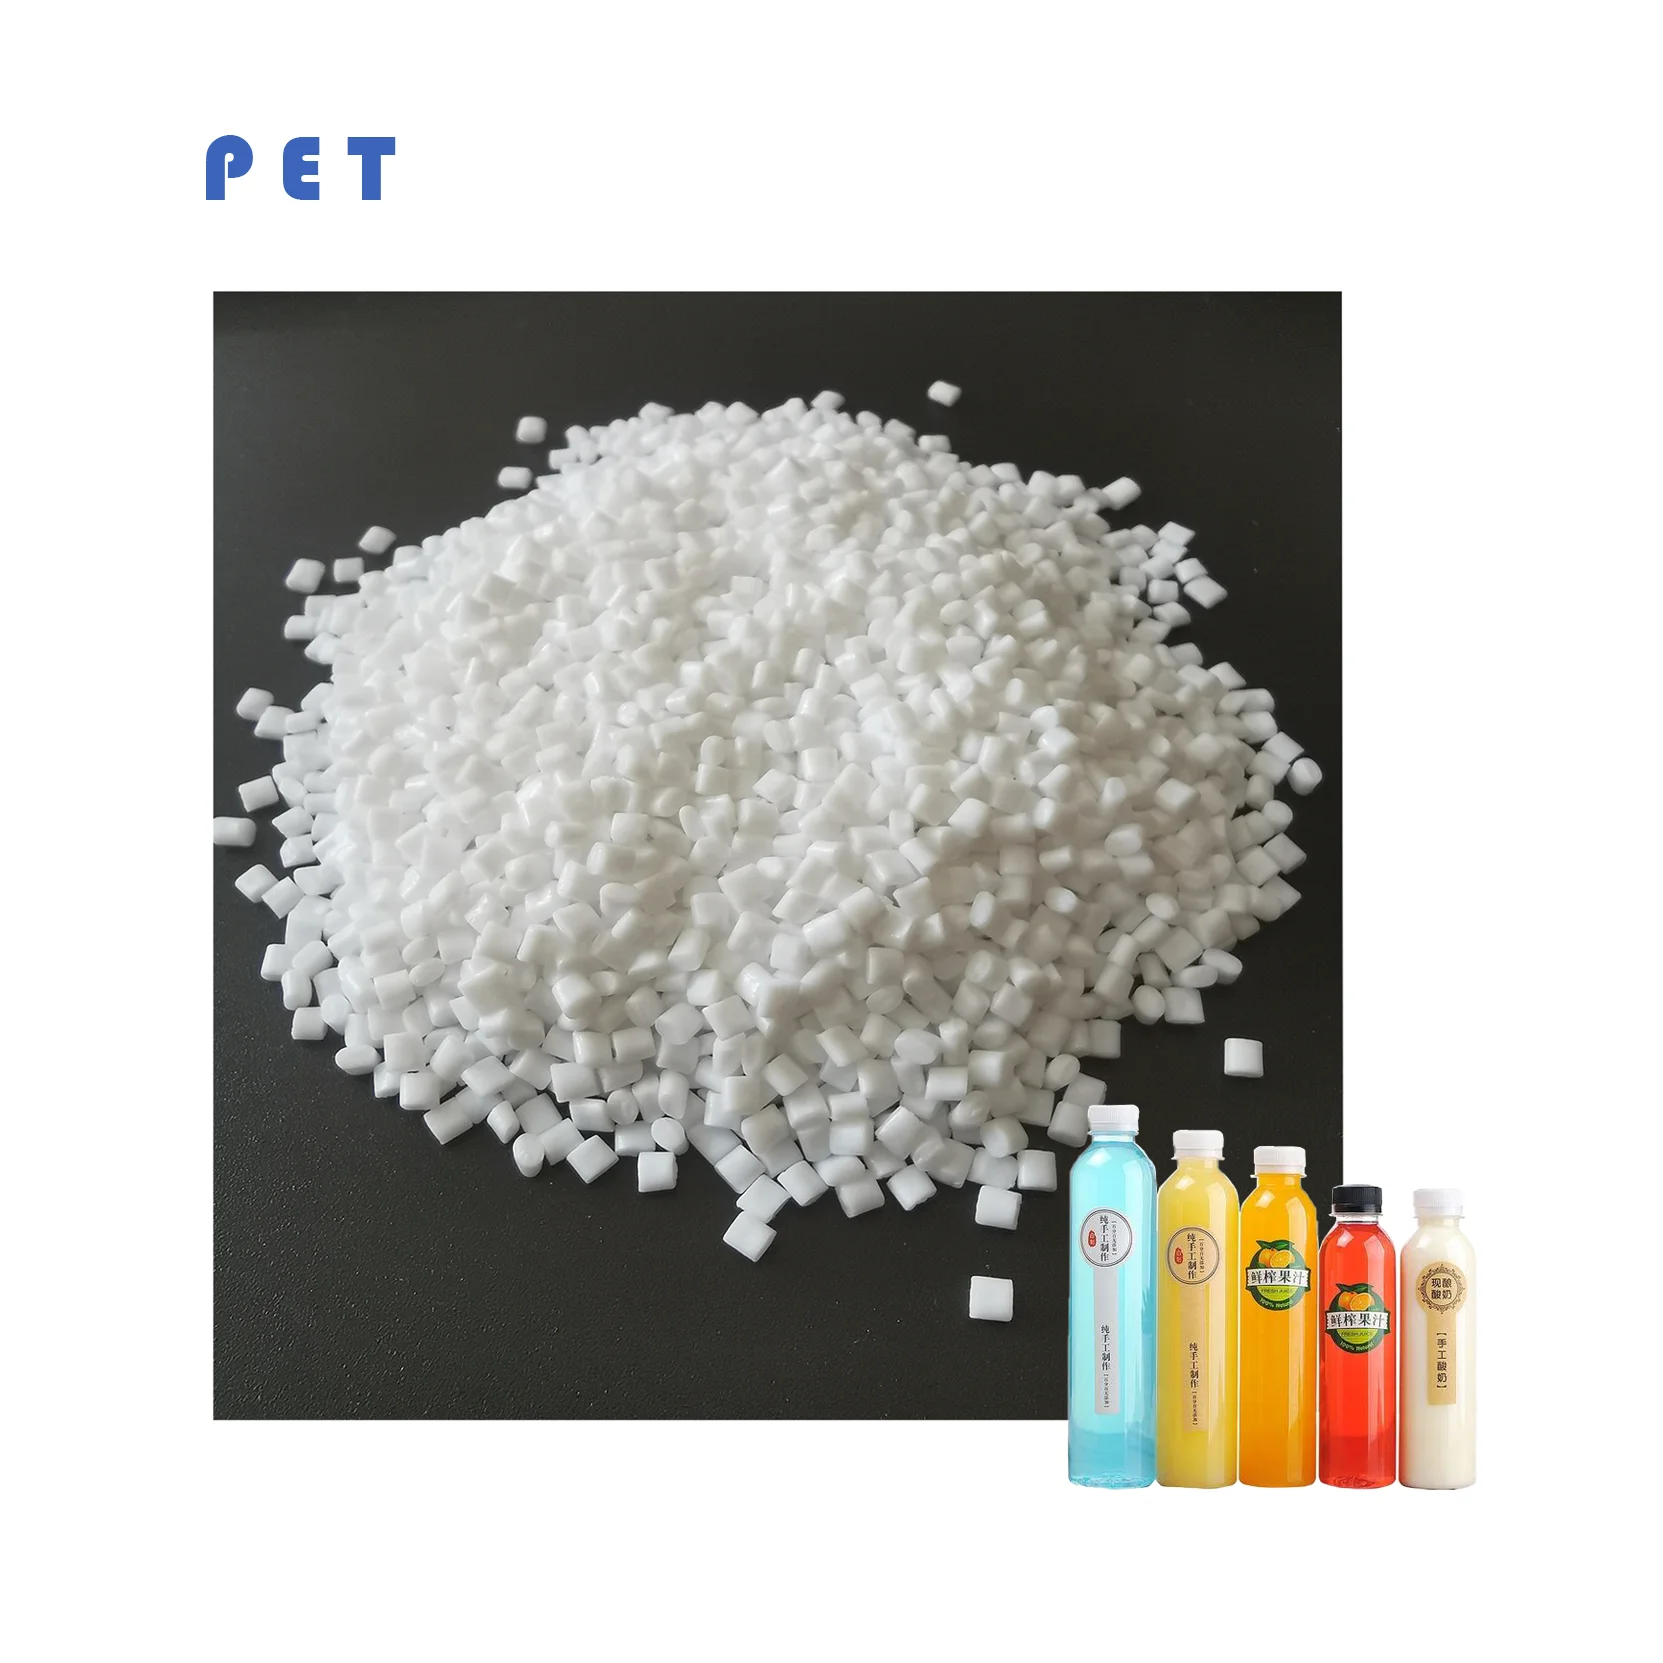 
Top quality virgin PET resin bottle grade from biggest Chinese manufacturers 